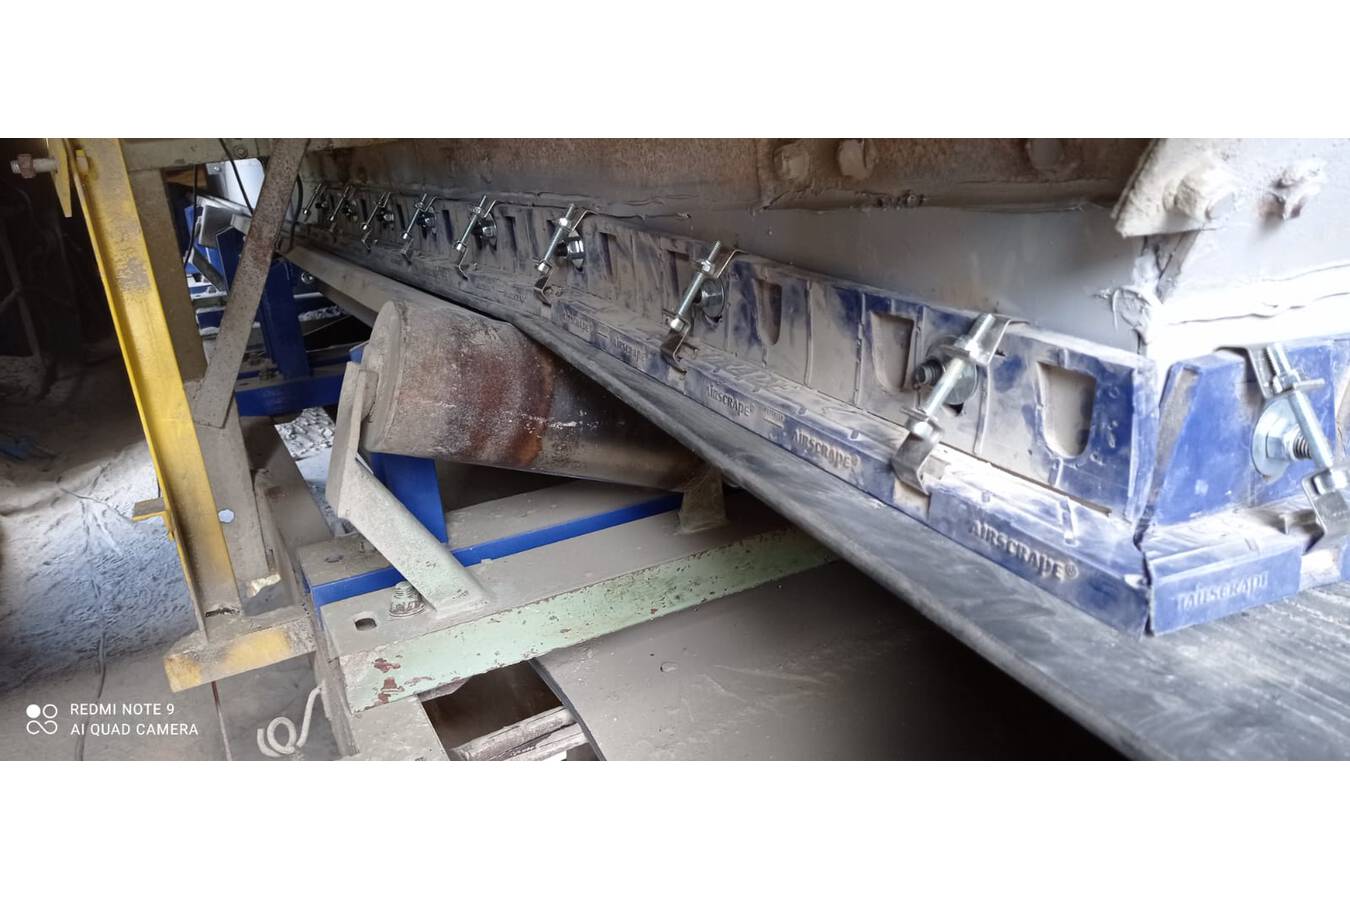 Maintenance-free conveyor skirtings conquer the mining world Efficiency at its Best Dust-, spillage- and maintenance-free Conveyor Skirtings supplied from Kamp-Lintfort, Germany conquer the World of Mining